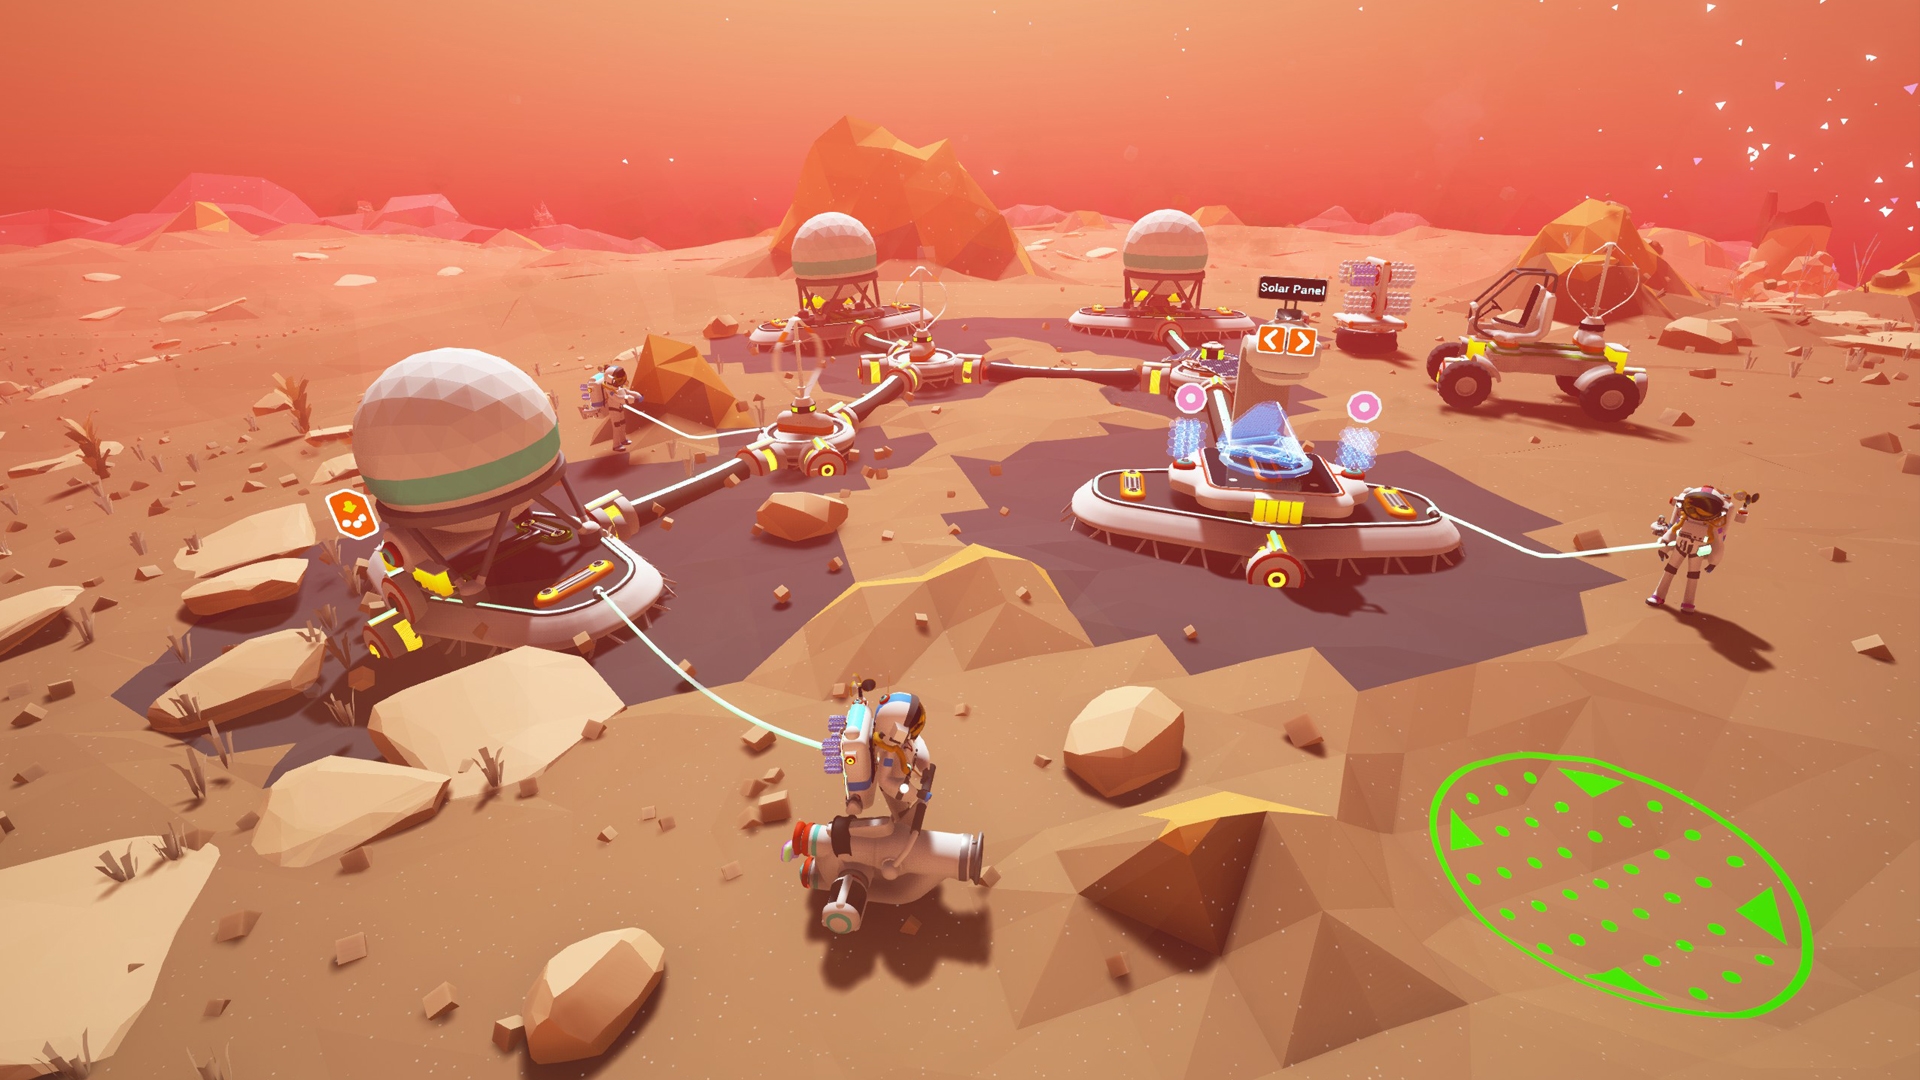 ASTRONEER (only for Russian Steam account)